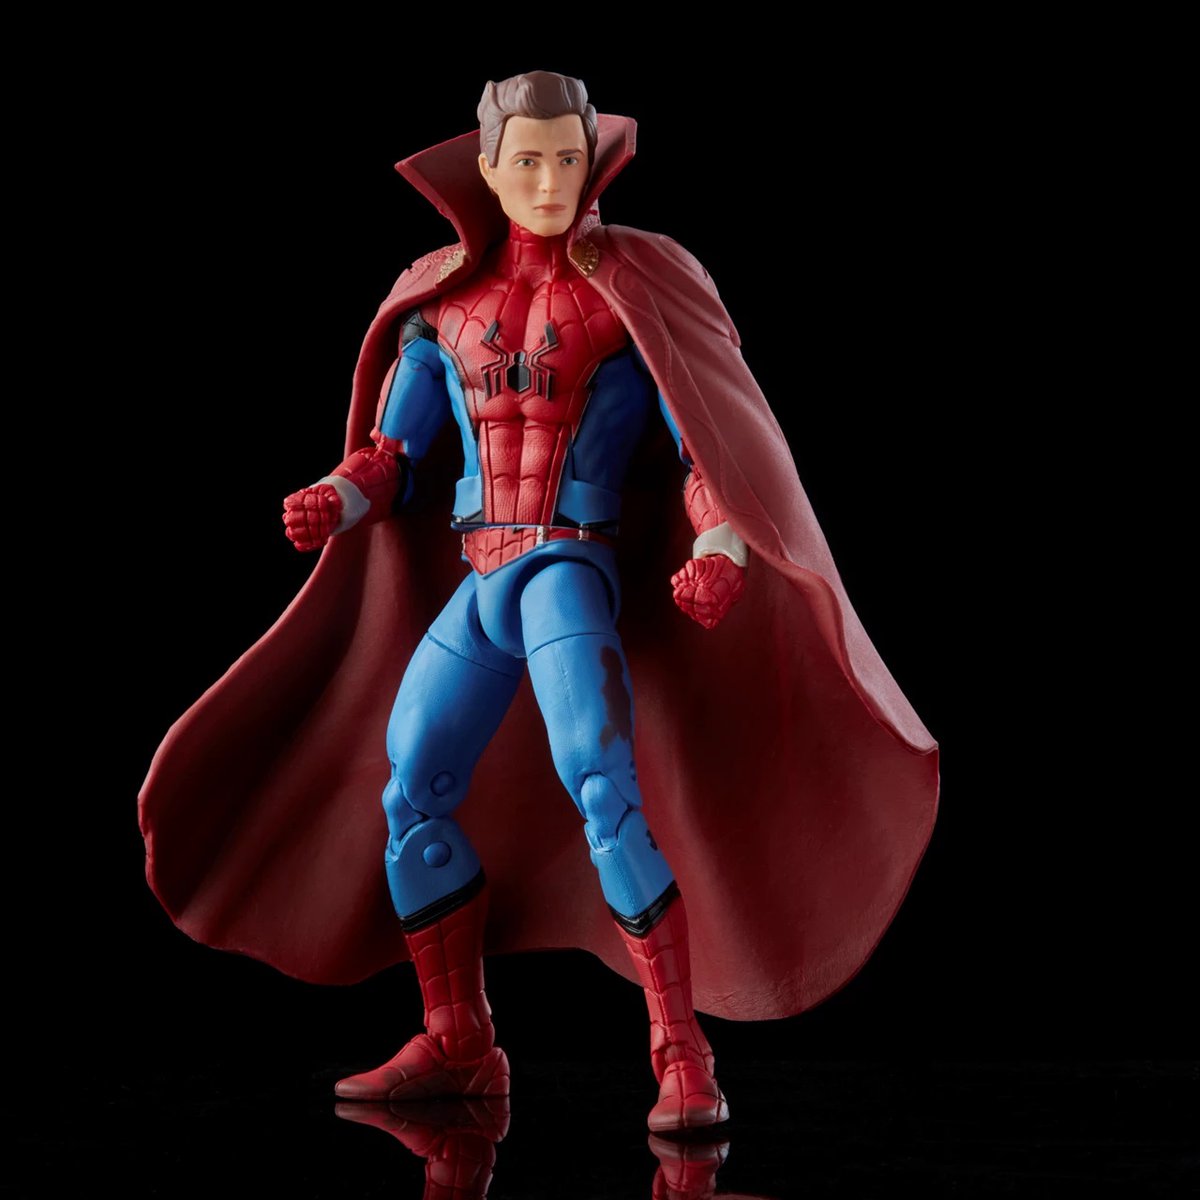 IN STORE NOW!

A few more Marvel Legends What If? figures have arrived in store- Zombie Hunter Spider-Man, Zombie Captain America, and restocks of Doctor Strange!

#whatif #marvelcomics #mcu #spiderman #marvelzombies #doctorstrange #marvellegends #hasbro #FPI https://t.co/h5wTgoUAai